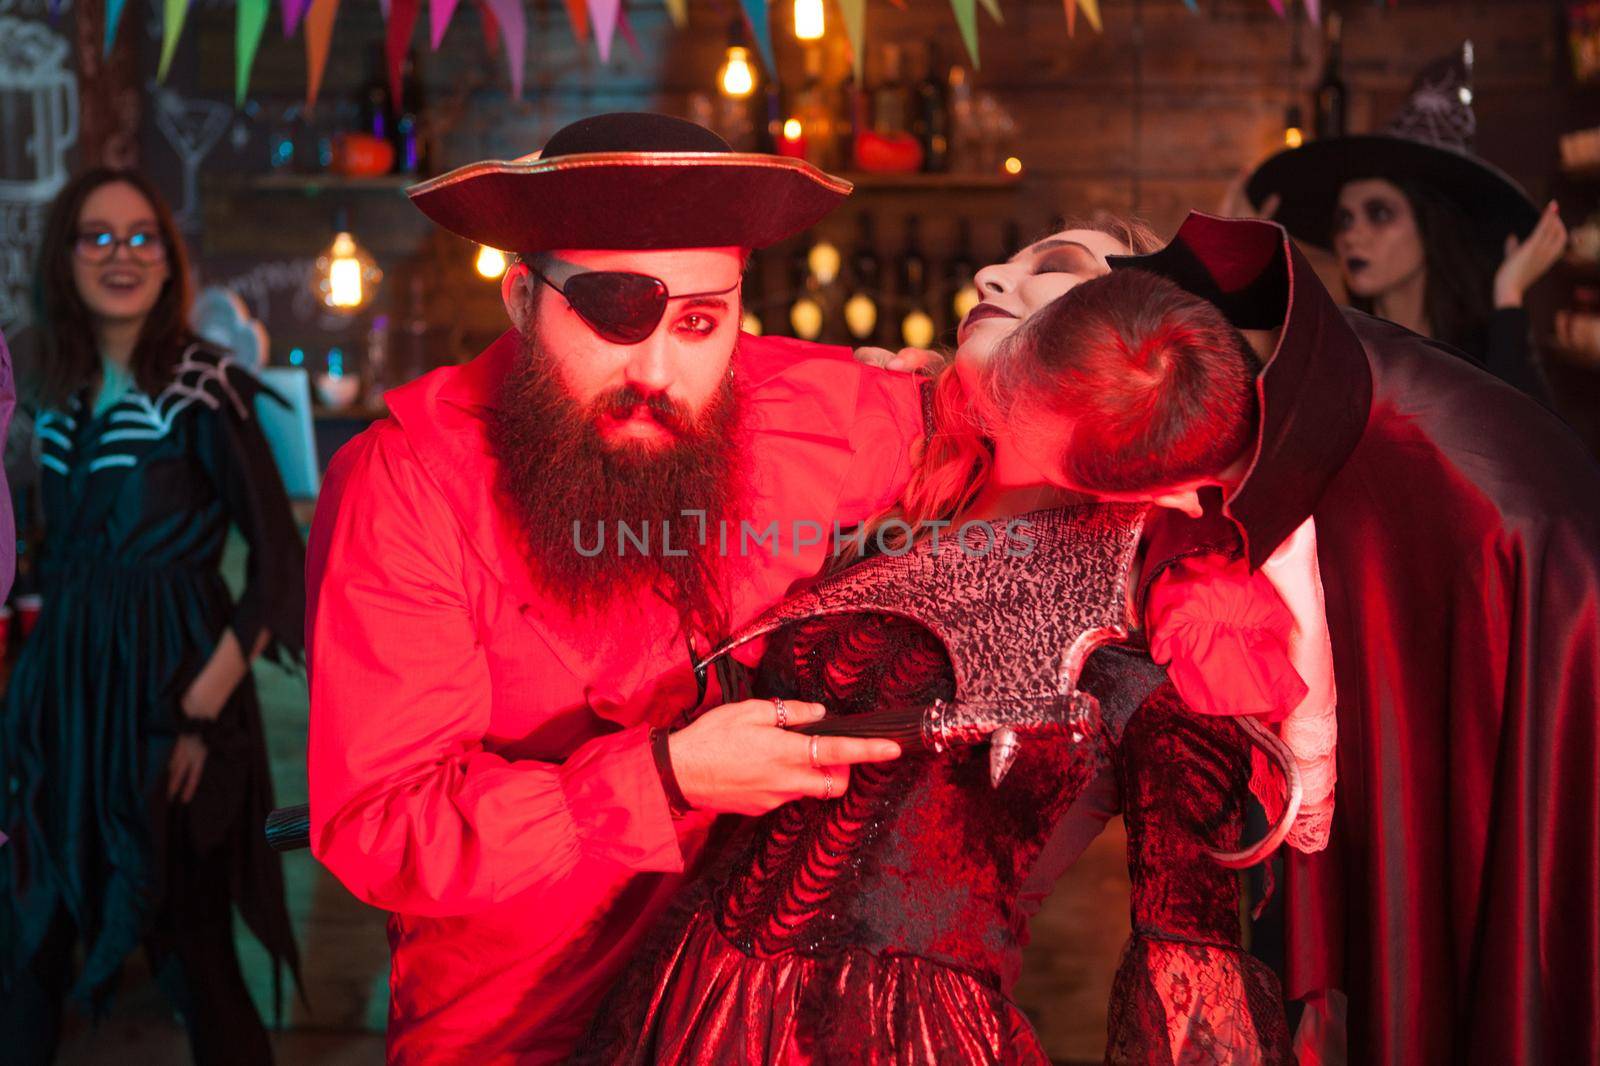 Man in dracula costume biting woman's neck dressed up like a witch for halloween. Man in pirate costume.